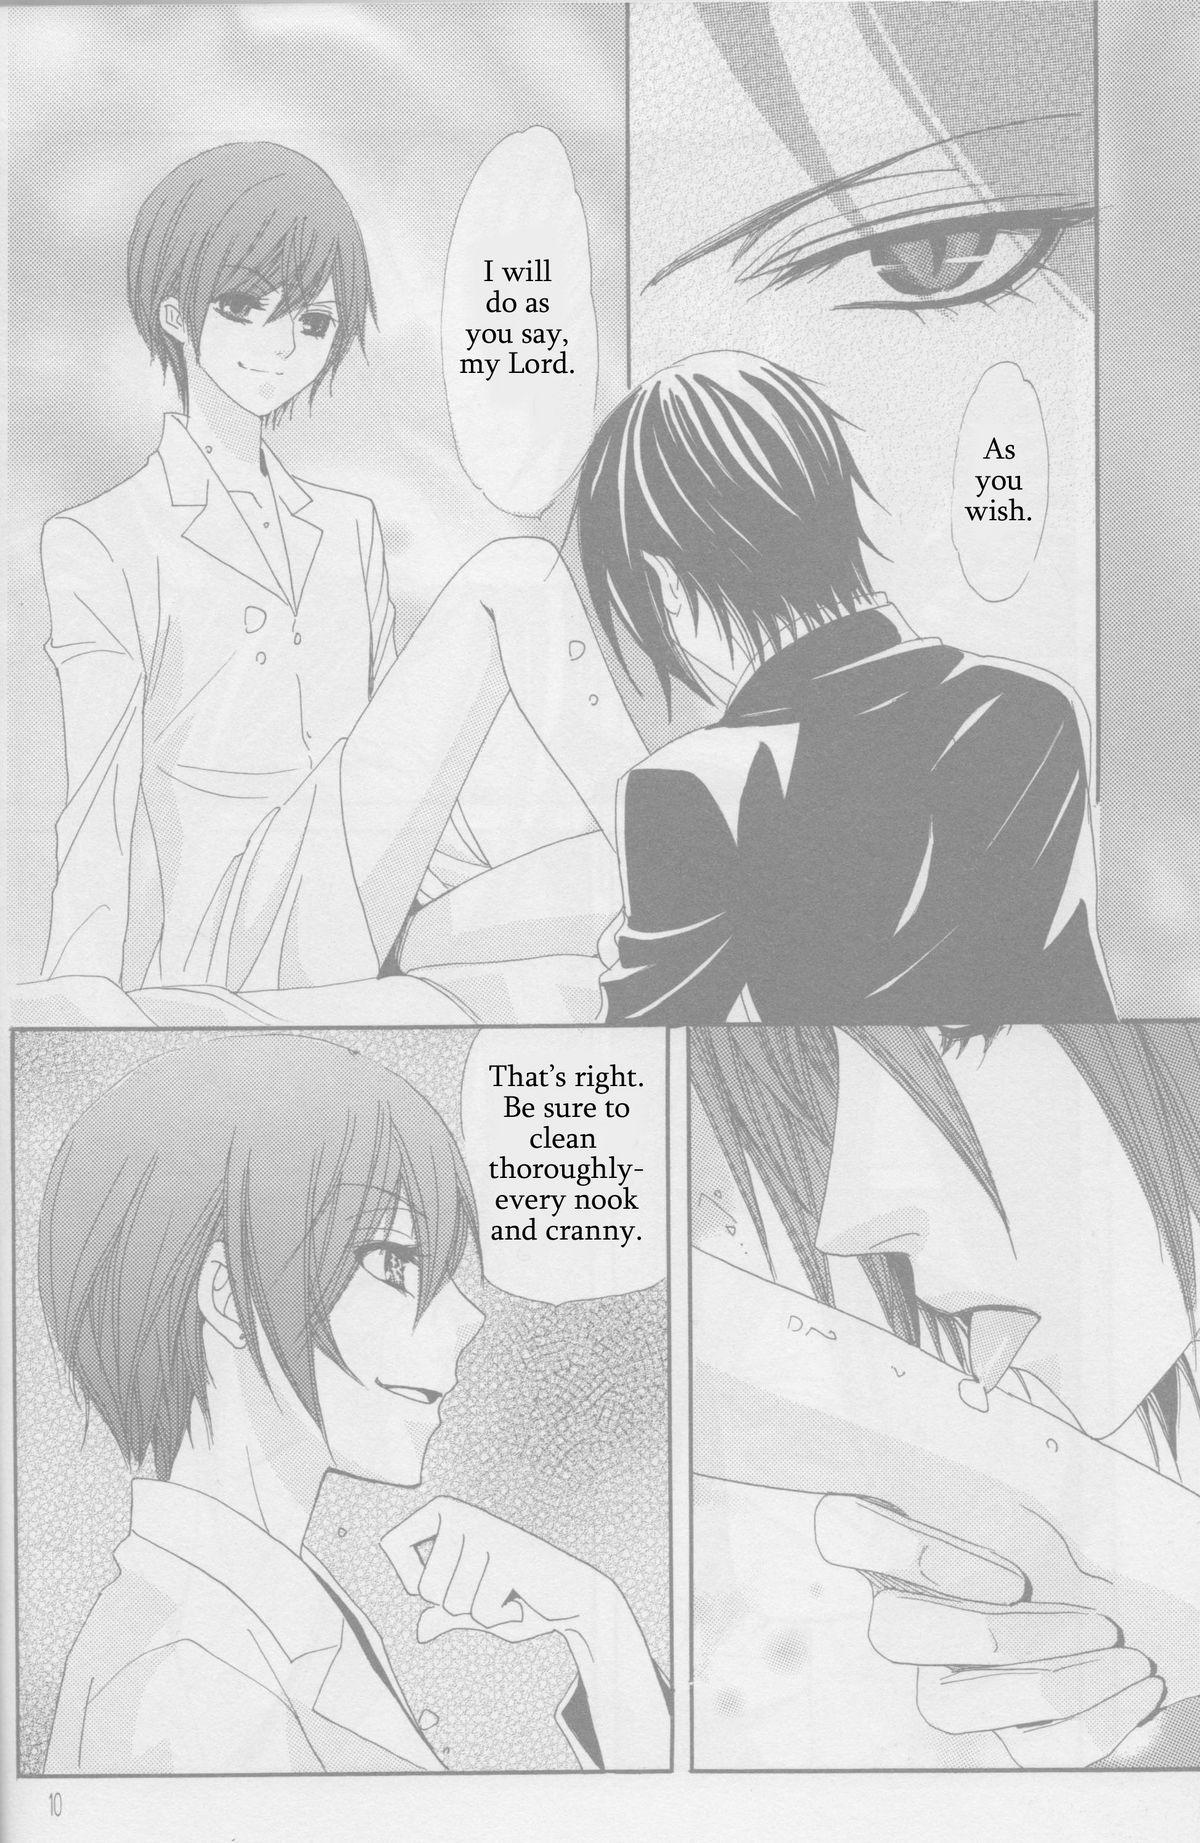 Best Blowjobs Ever Strawberry Cake - Black butler Camera - Page 9